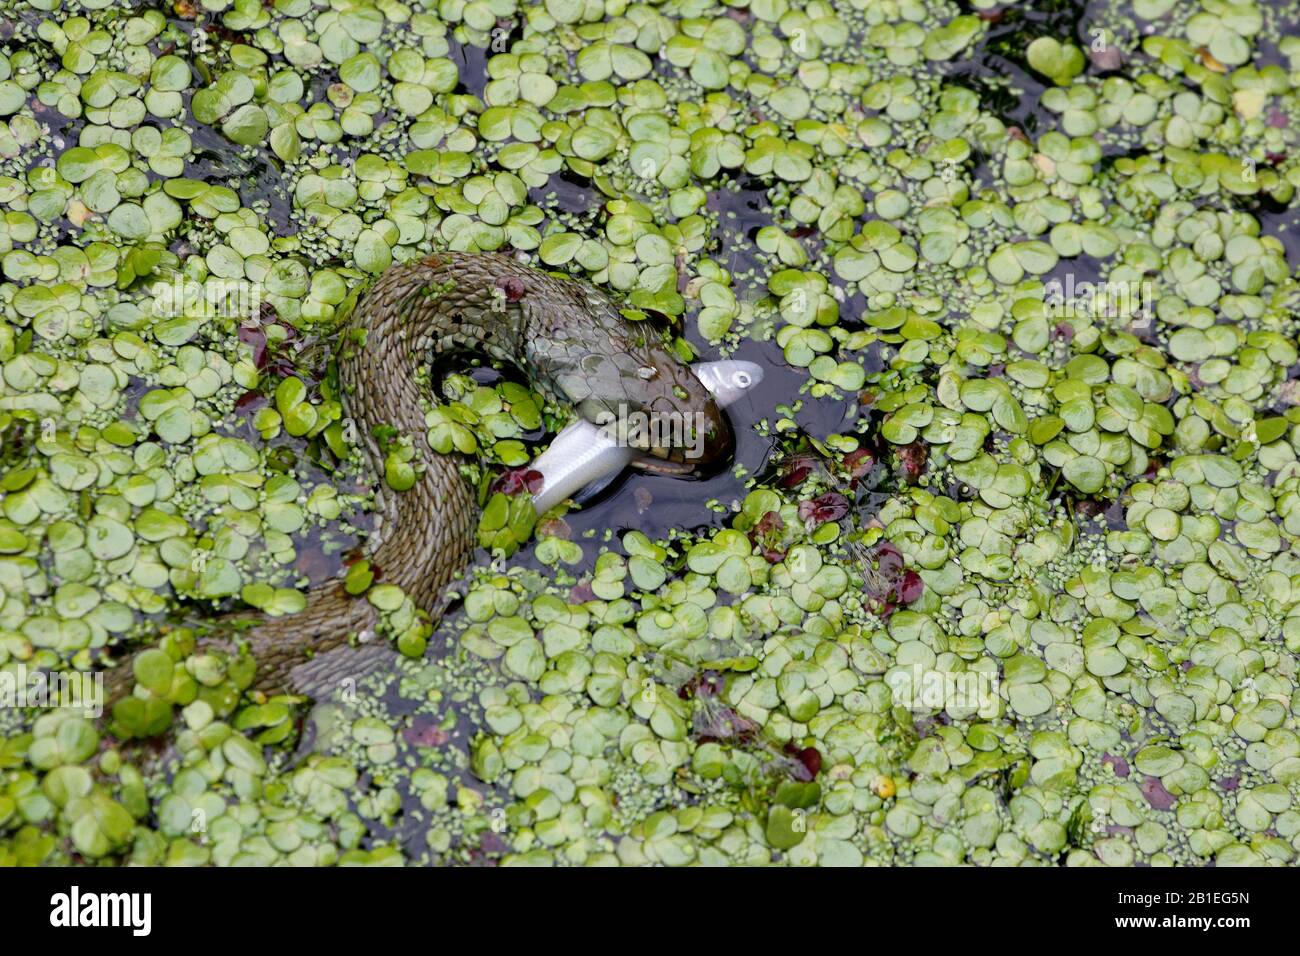 Grass snake (Natrix natrix) eating a fish in a pool of Kerdanet in Plouagat, Brittany, France Stock Photo